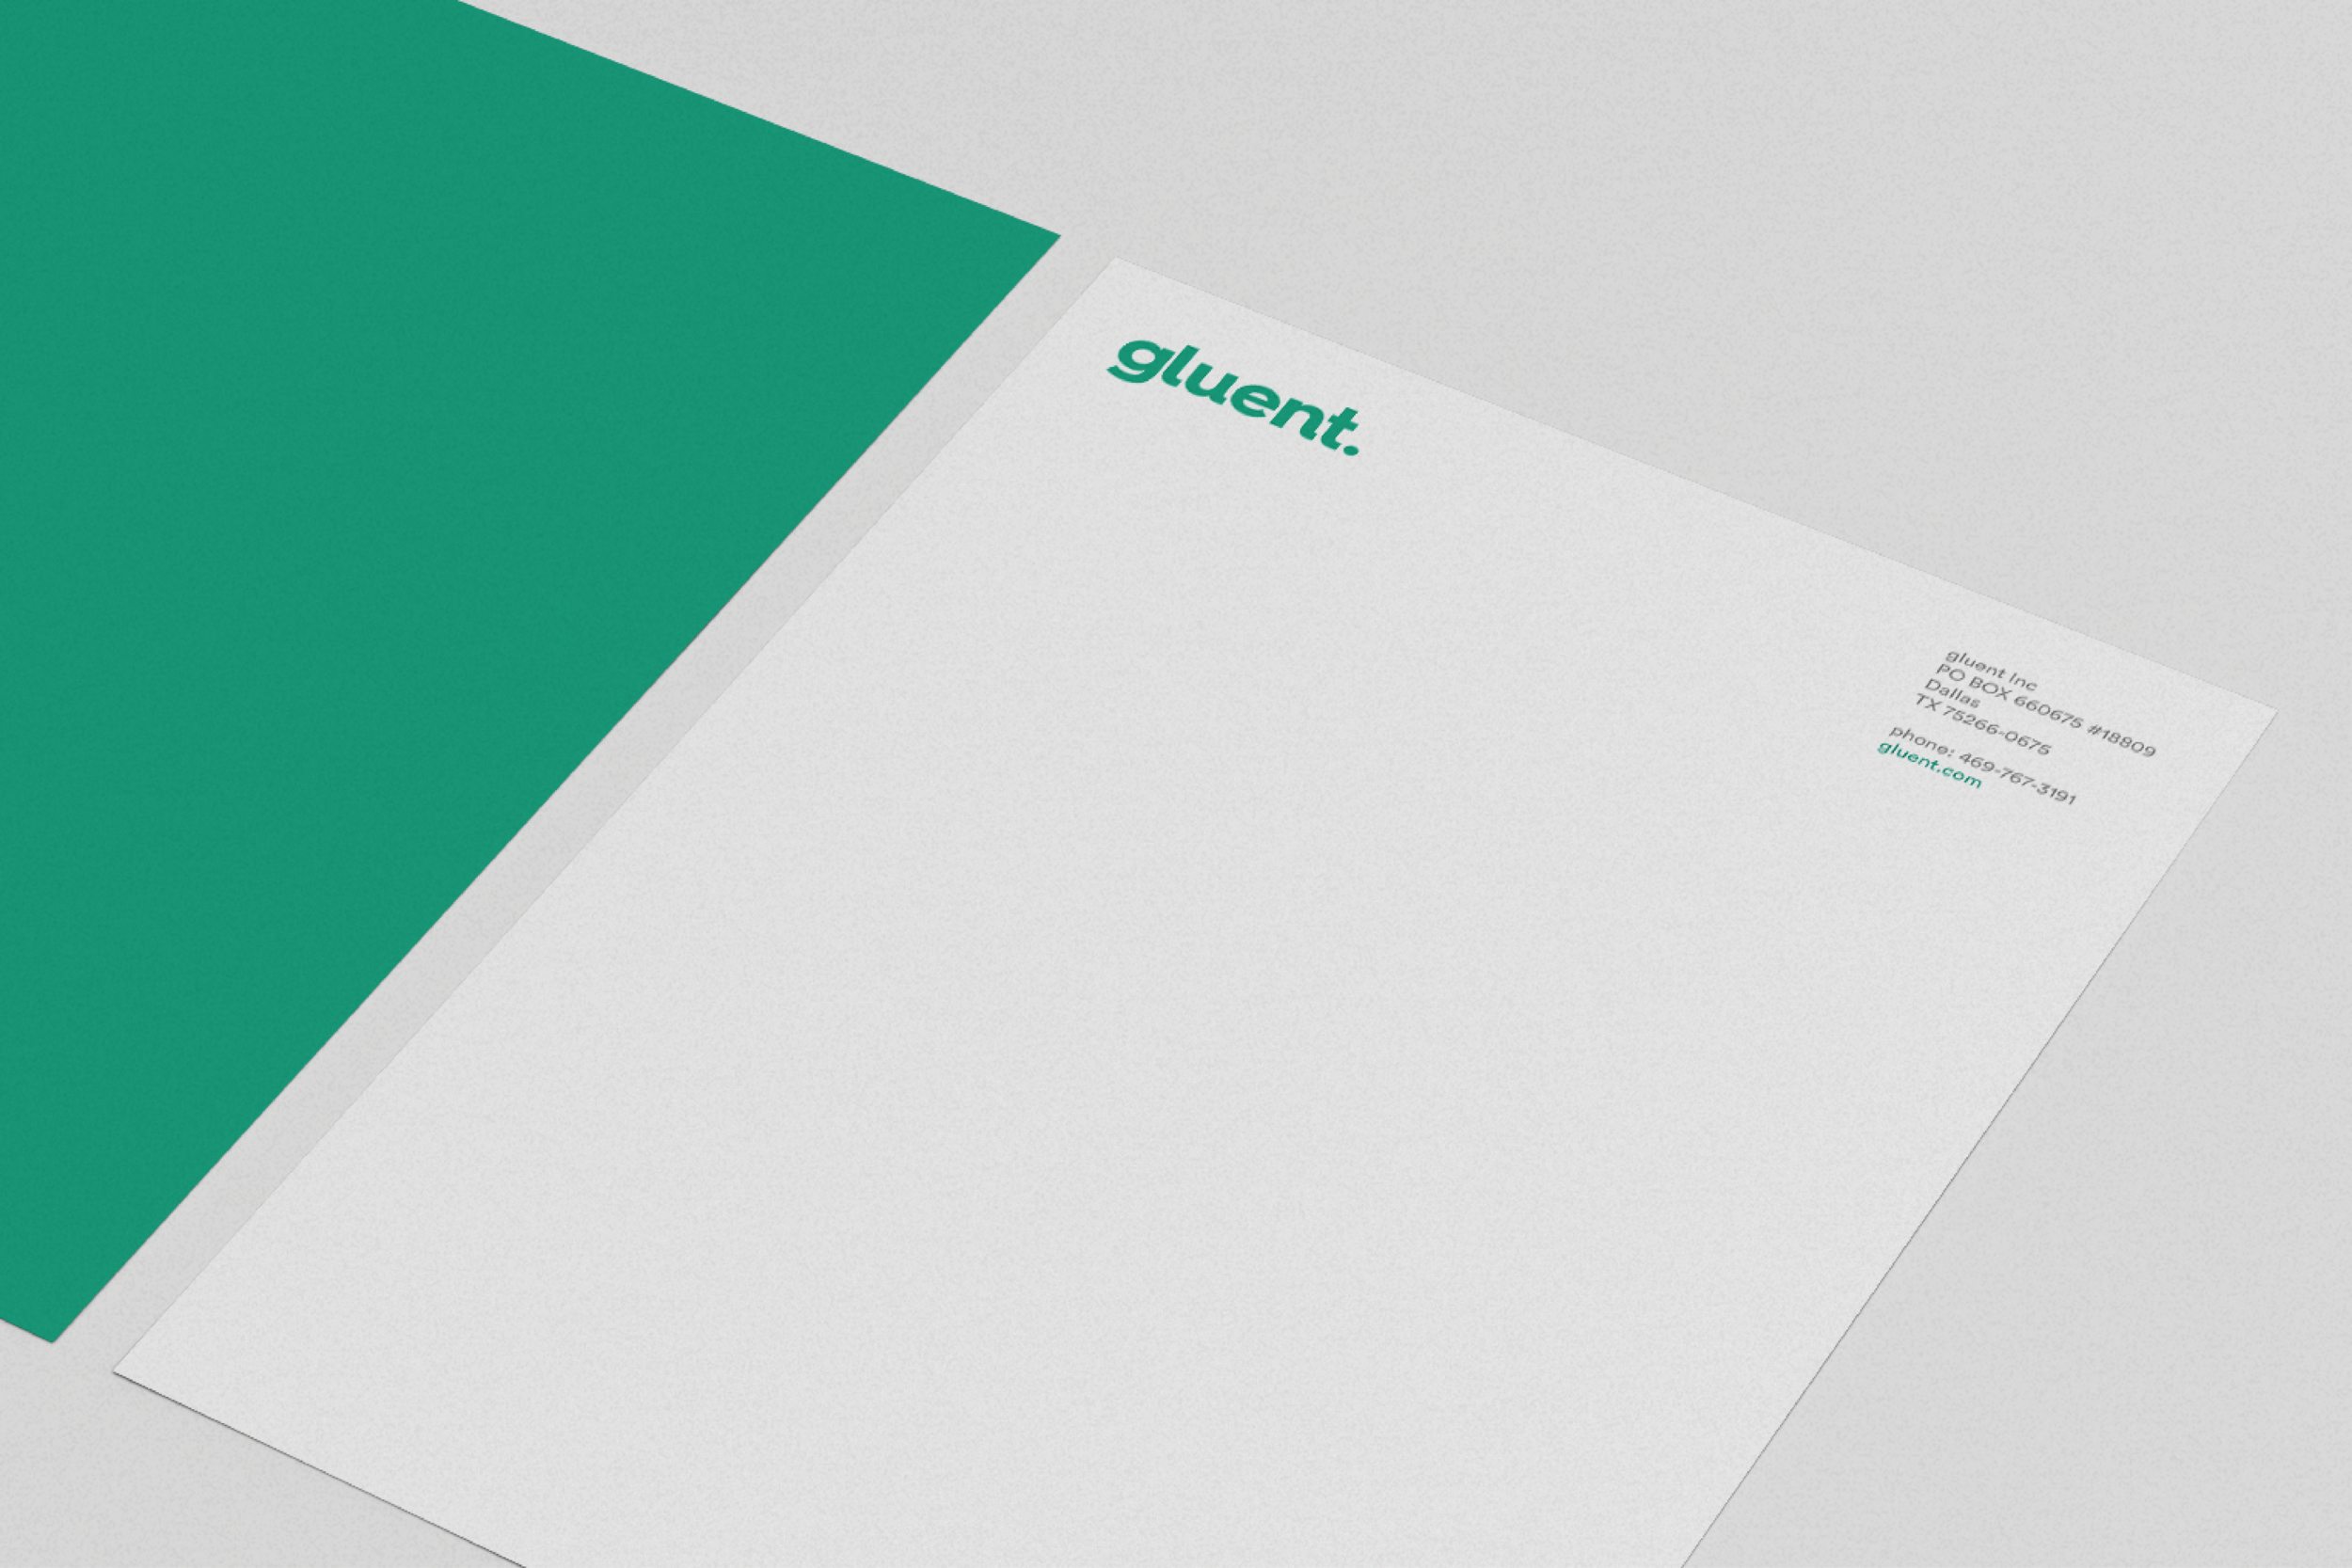 Branding consultant - gluent branded white A4 paper